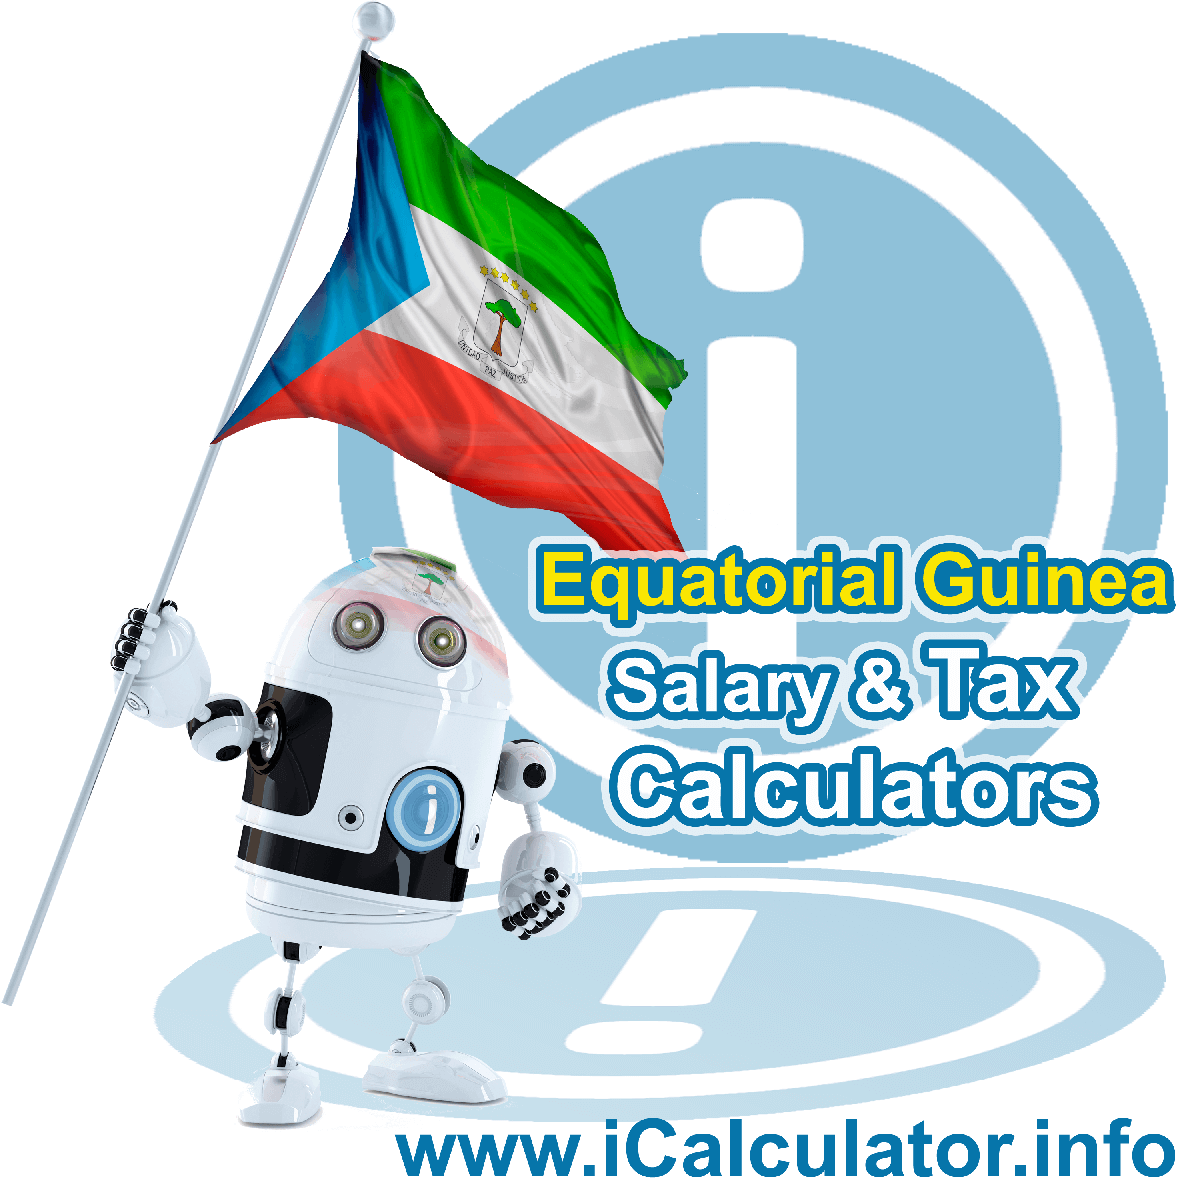 Equatorial Guinea Salary Calculator. This image shows the Equatorial Guineaese flag and information relating to the tax formula for the Equatorial Guinea Tax Calculator